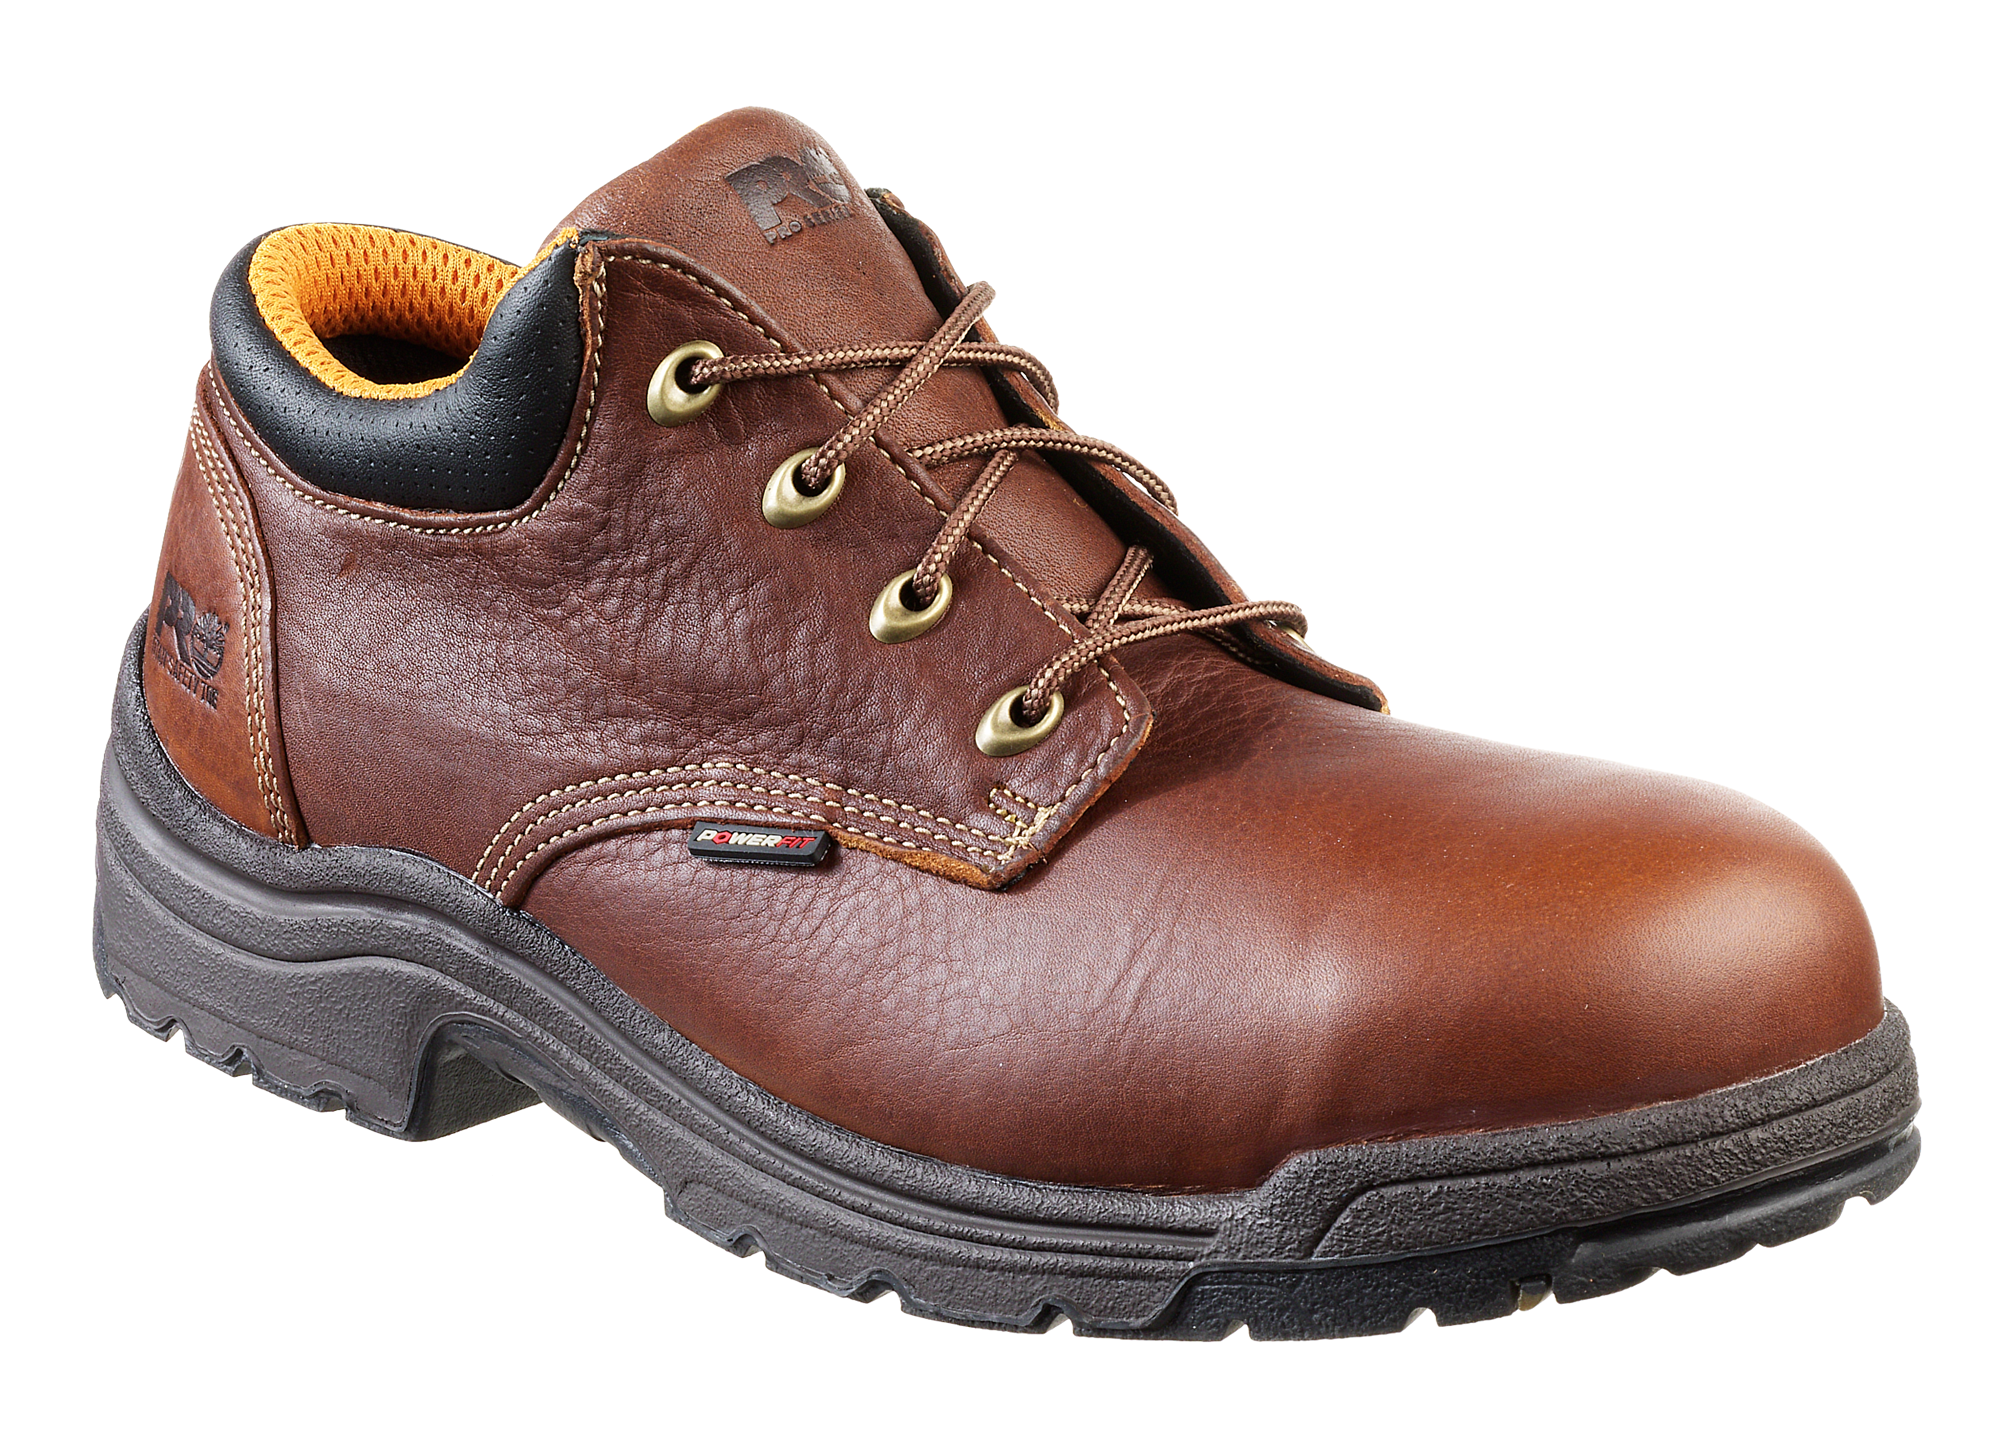 Timberland Titan Oxford Safety Toe Work Boots for Men | Bass Pro Shops